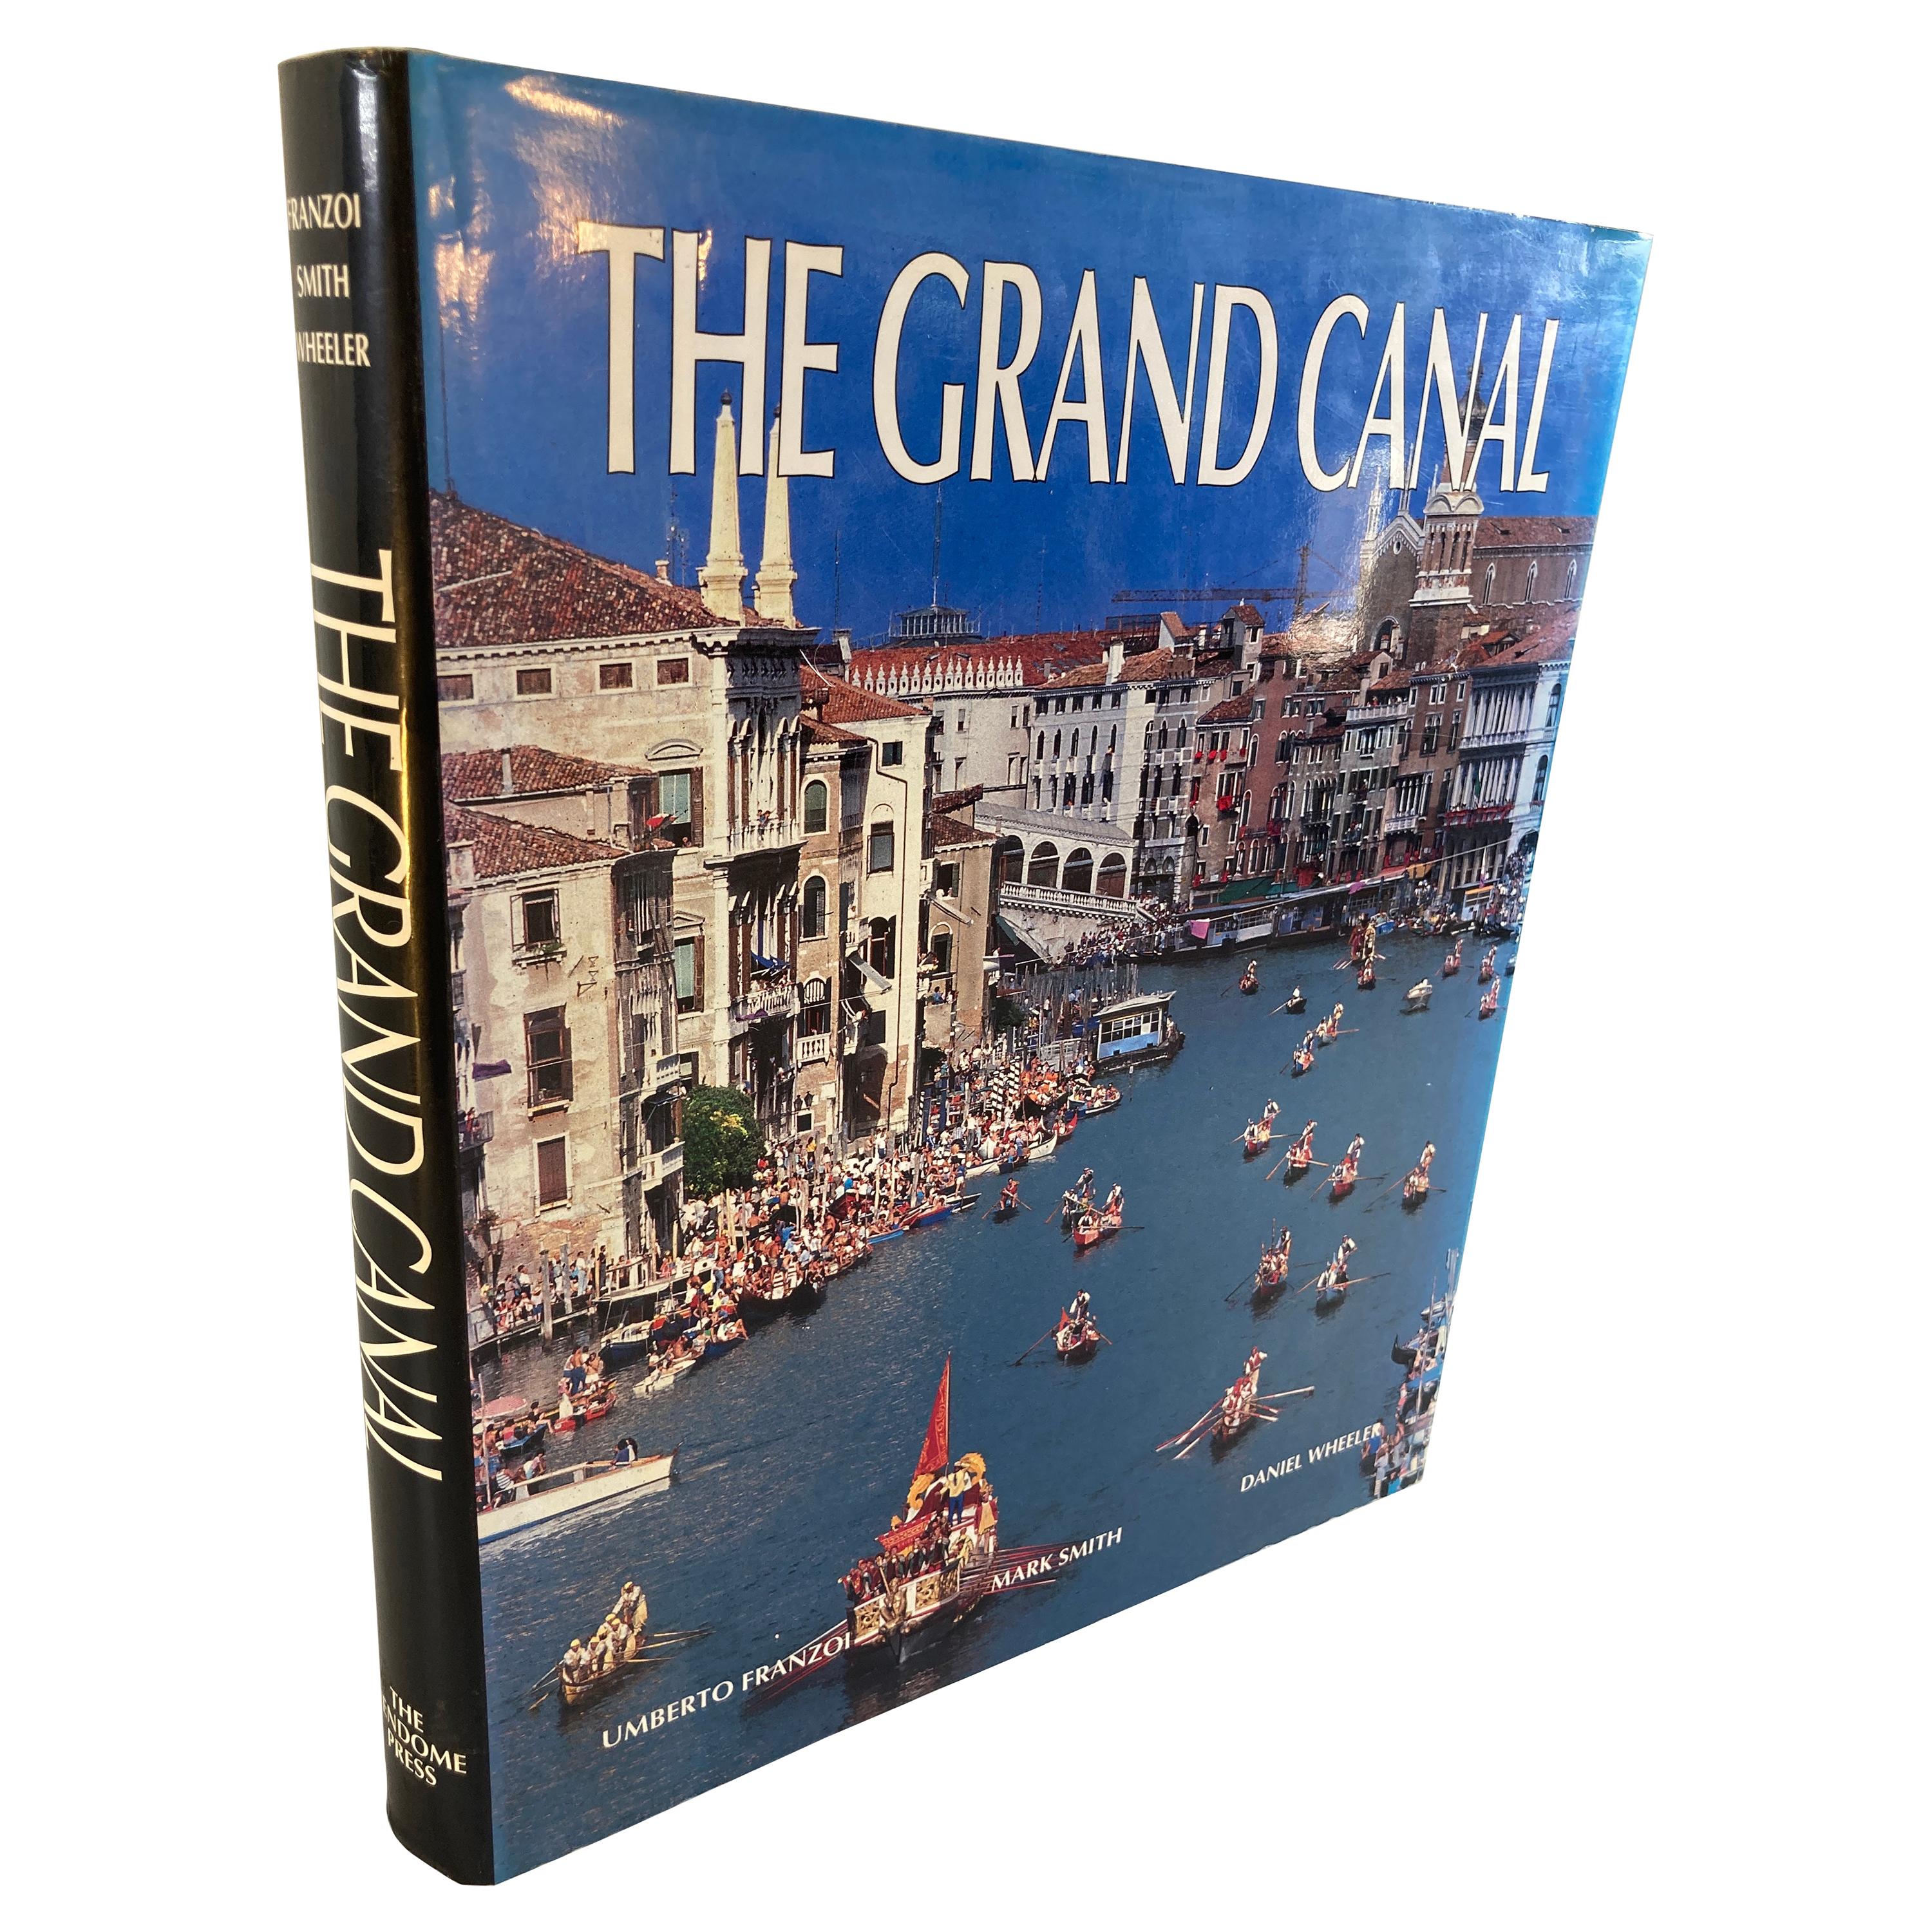 The Grand Canal by Umberto Franzoi Hardcover Coffee Table Book